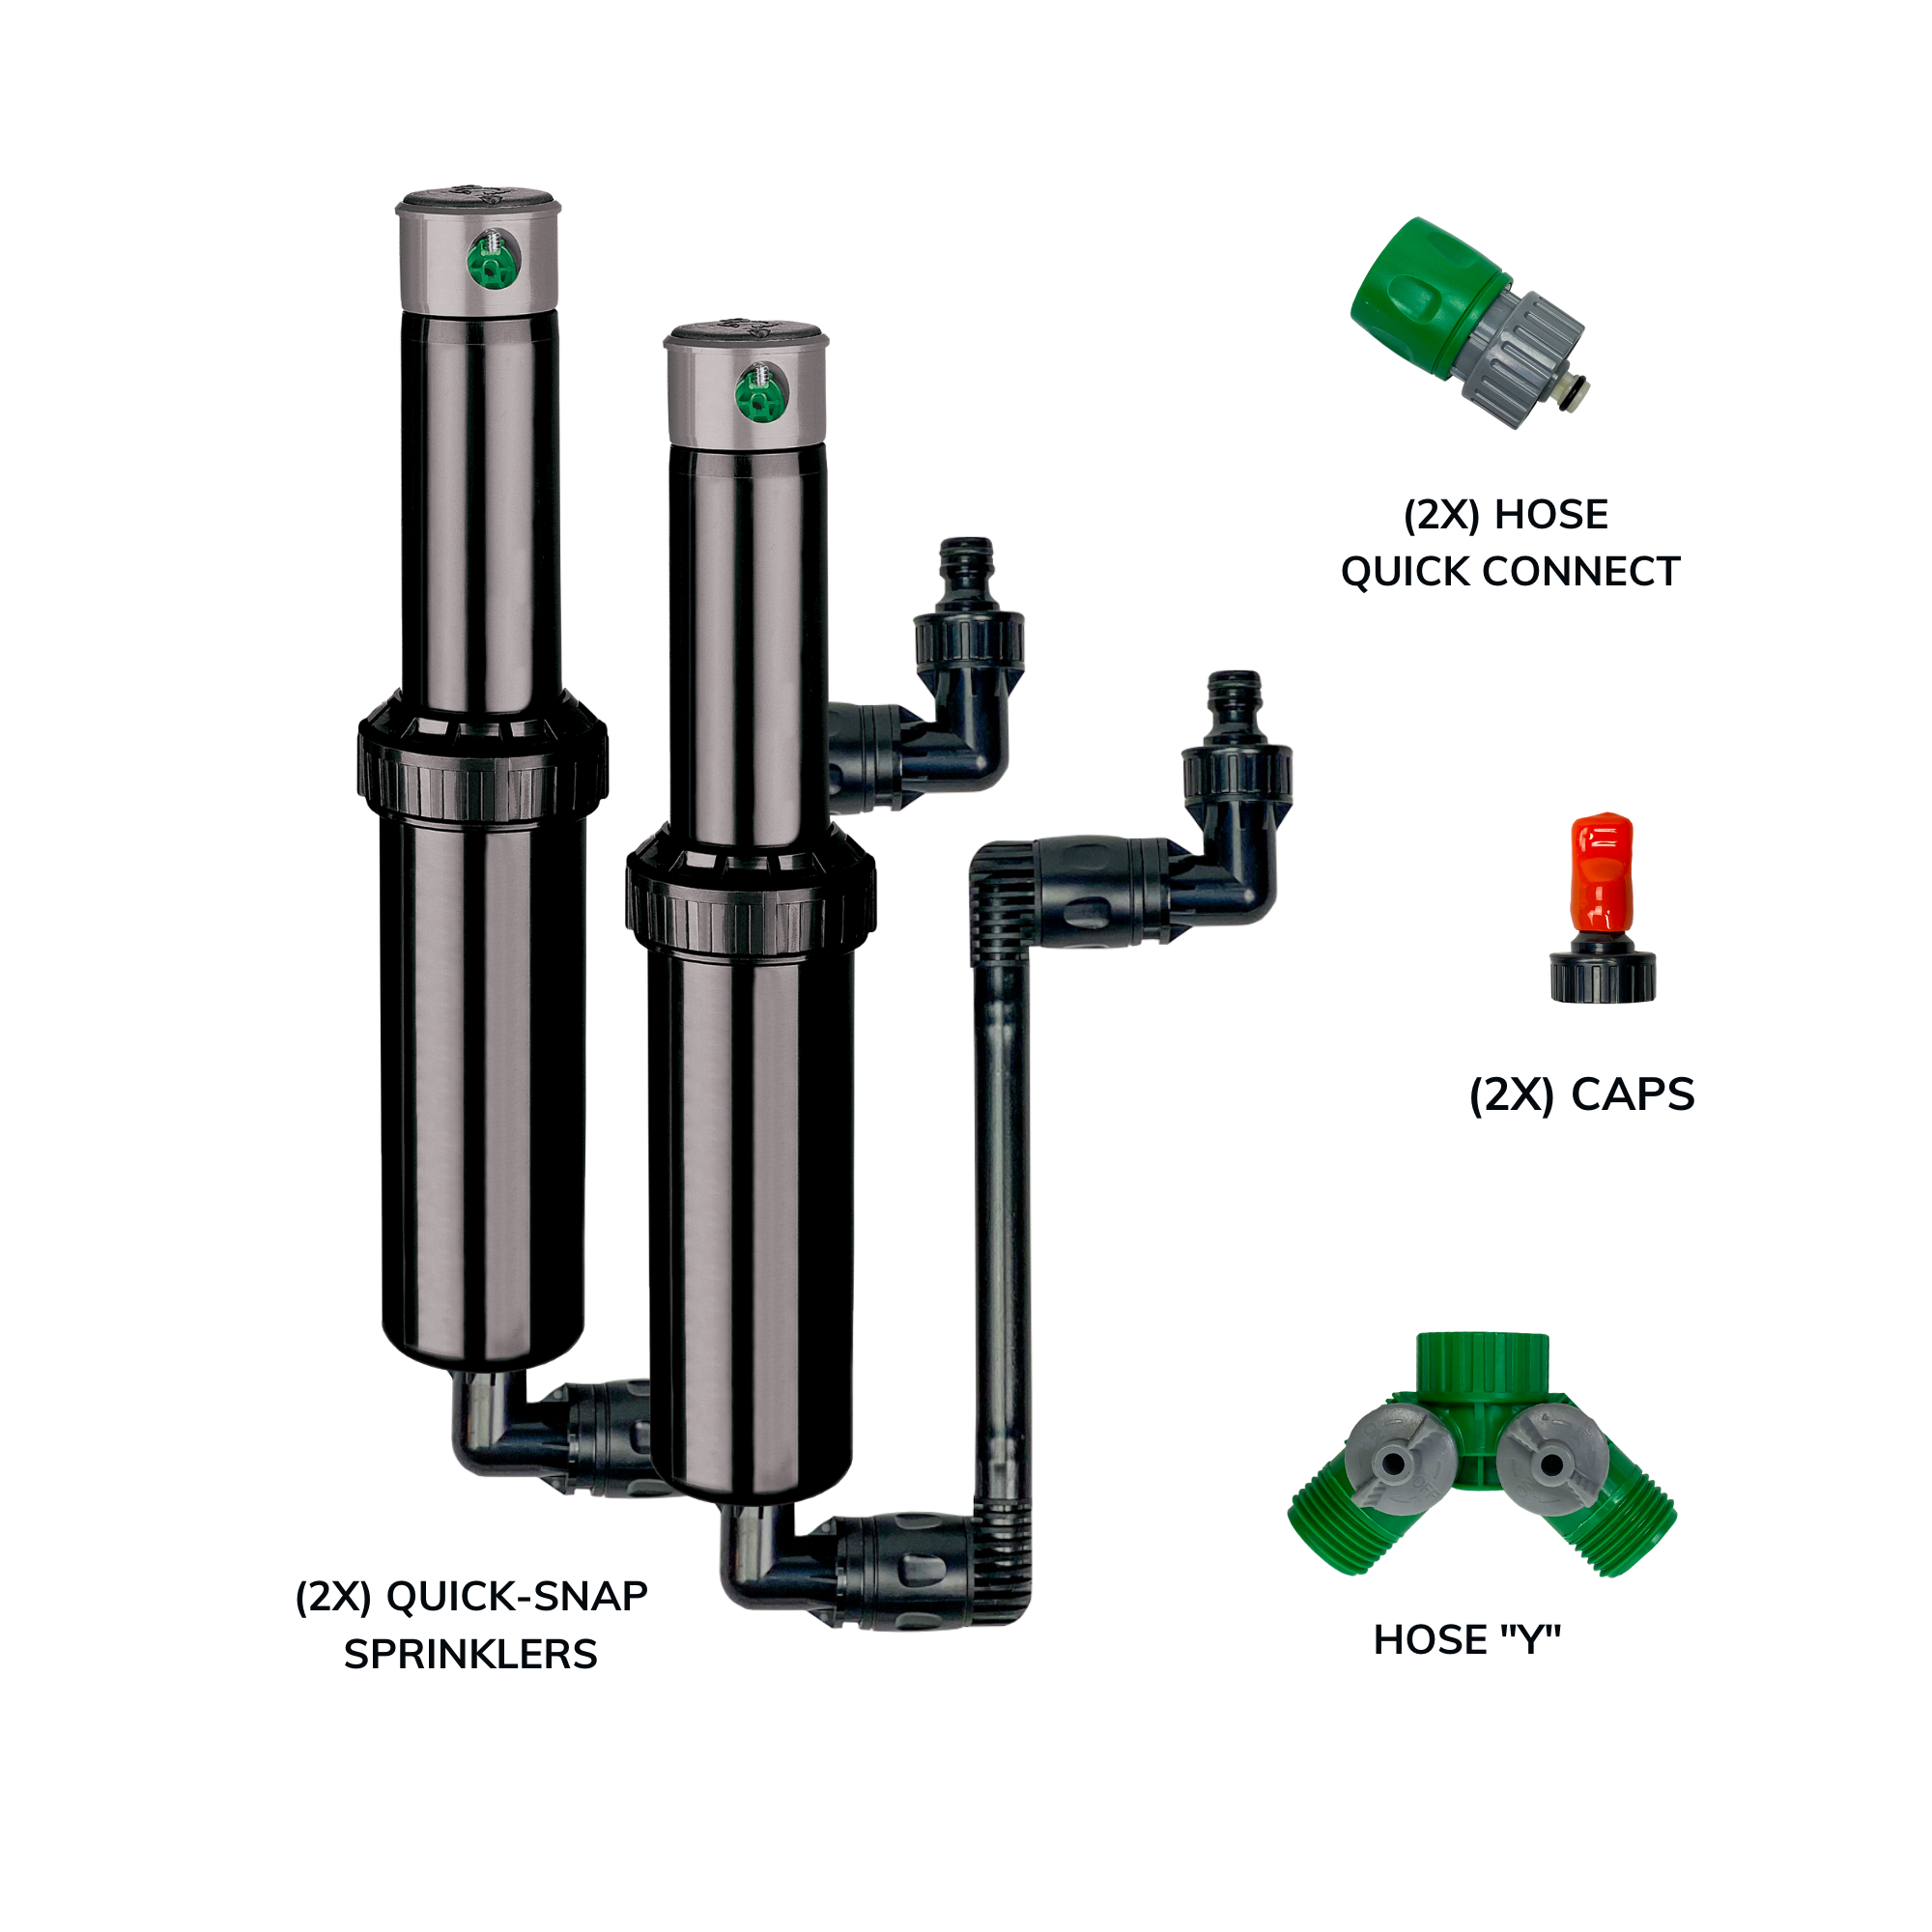 Autowater QSK-742 Quick Snap in Ground 5 in. Pop Up Adjustable Sprinkler with Quick Hose Connectors & Splitter, Pack of 2